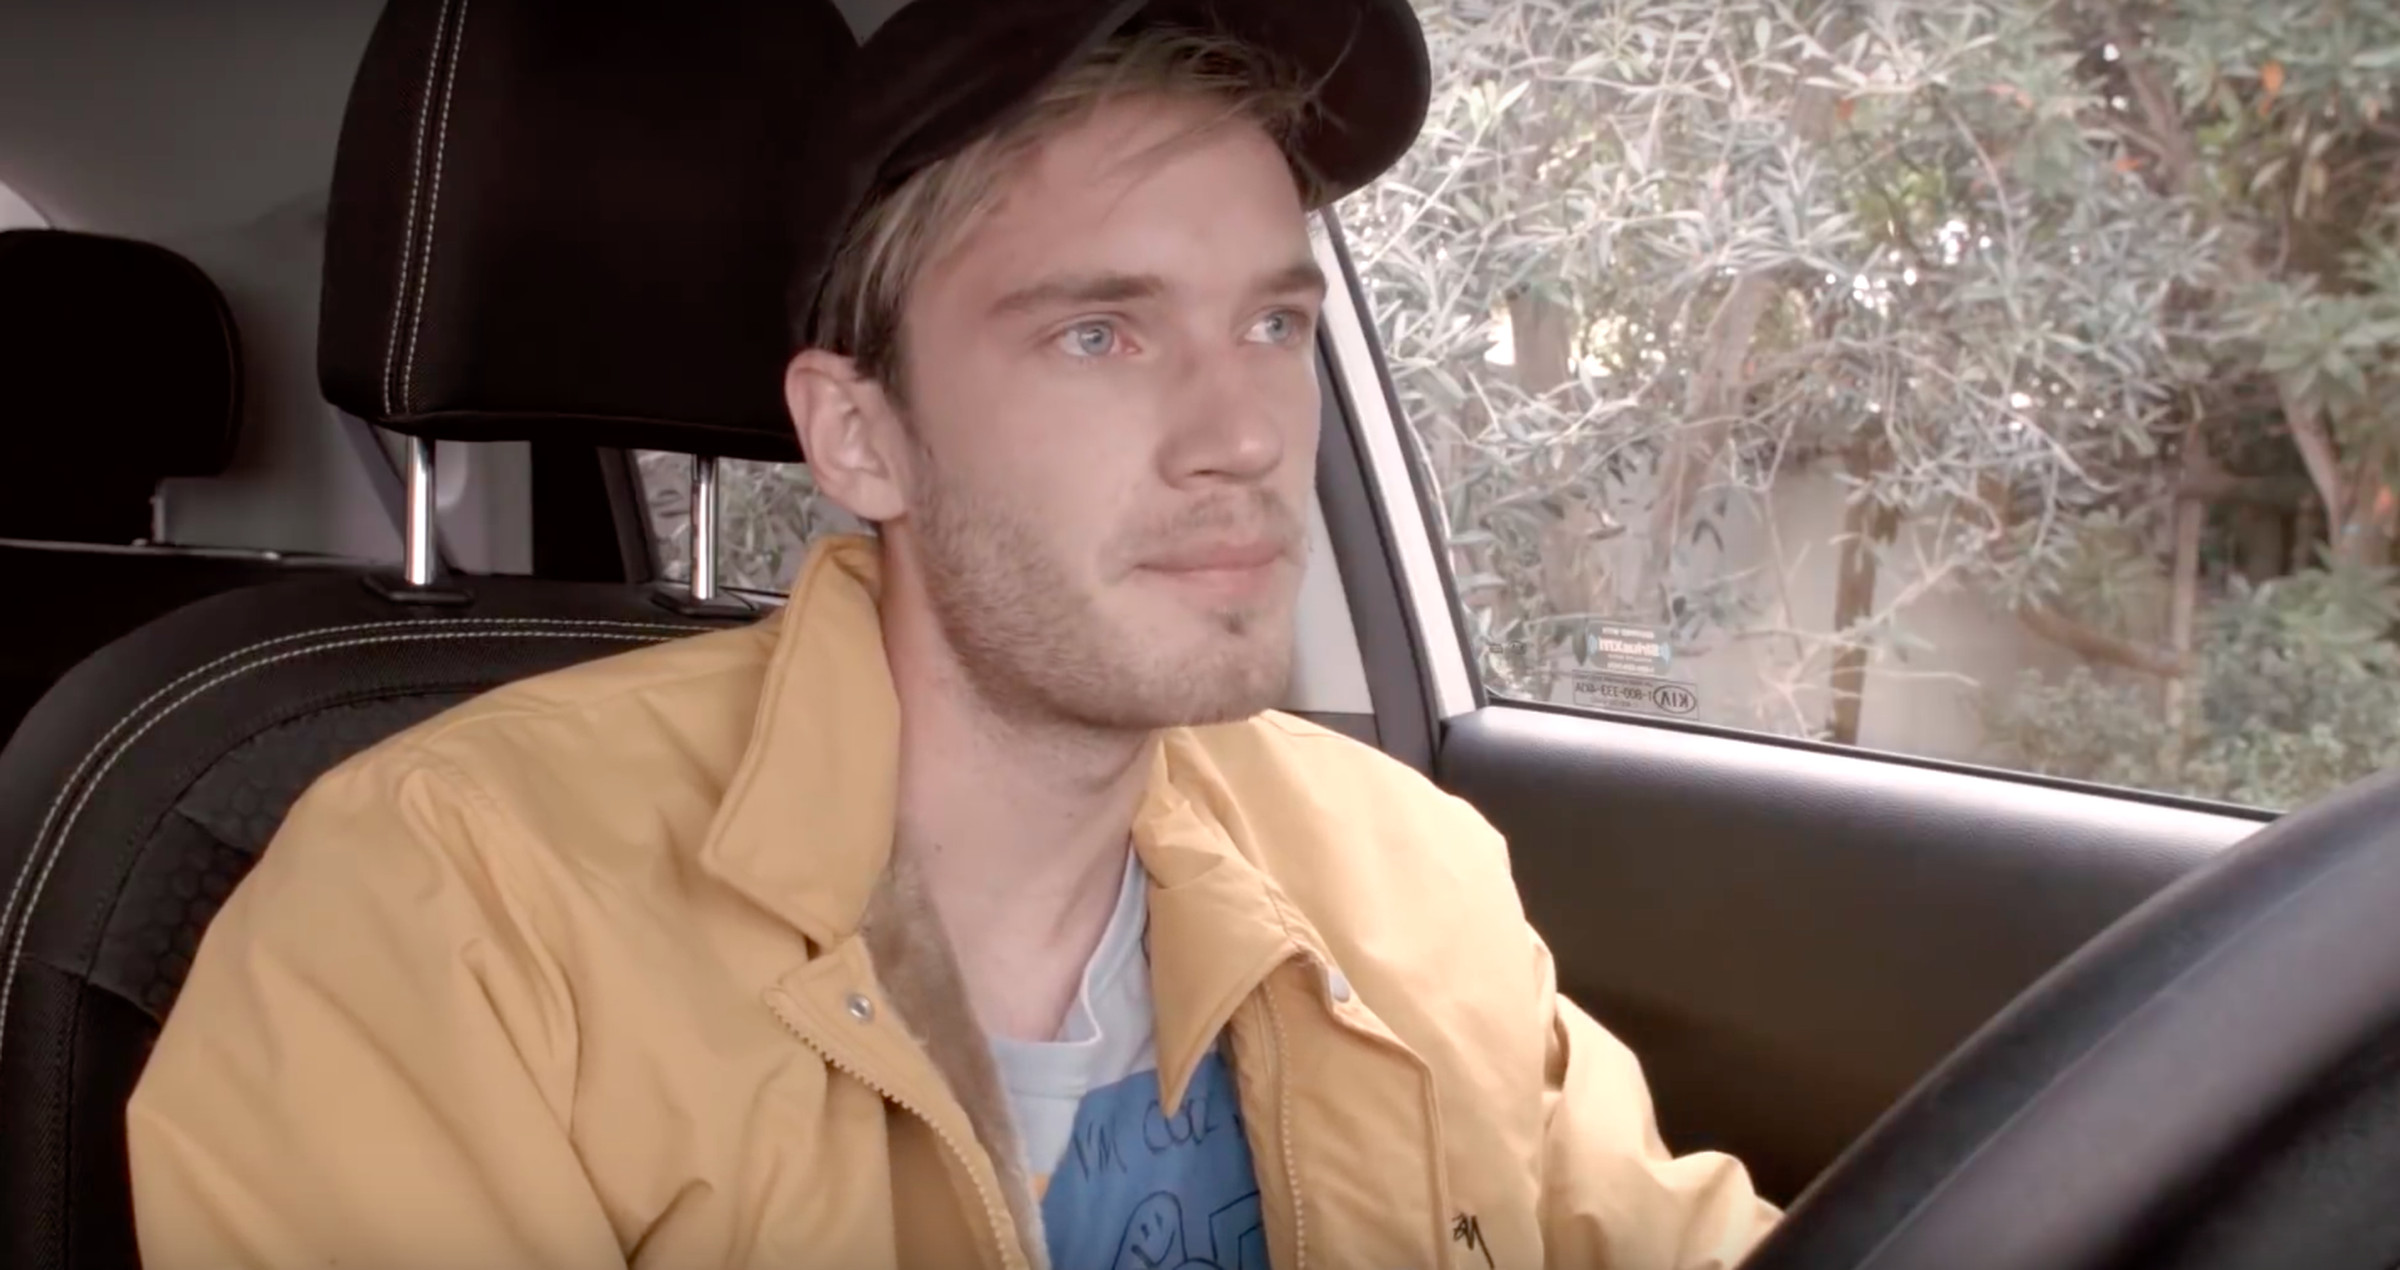 Pewdiepie in 2016, tearing up as he explains why he has to stop daily uploads during a stressful period in his life. 